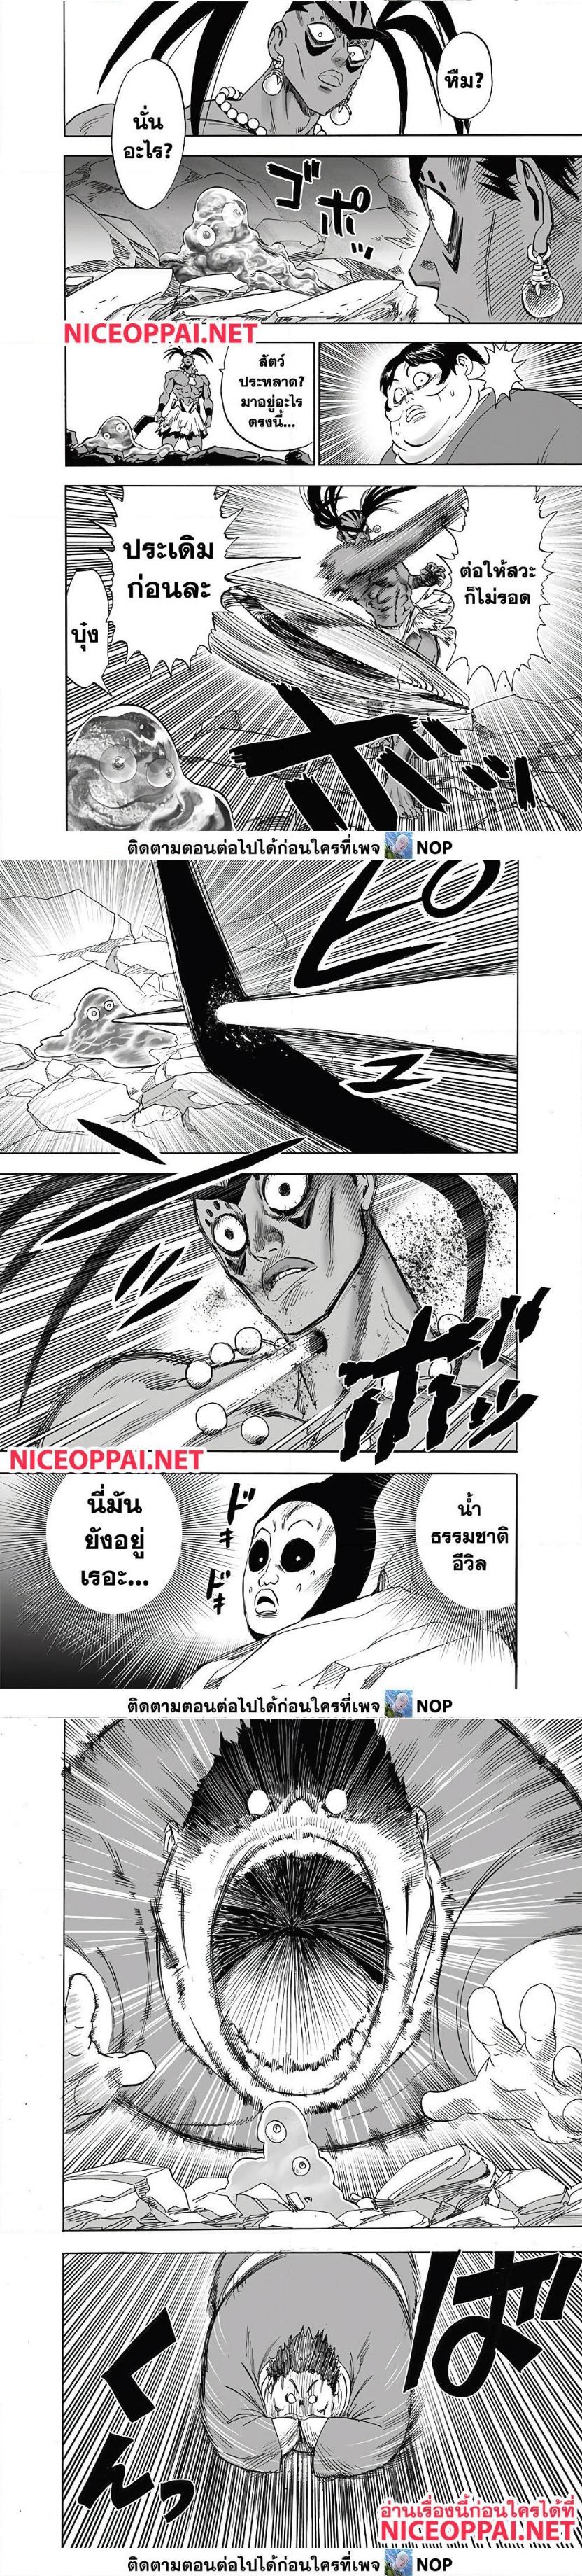 One Punch Man 171 (6)